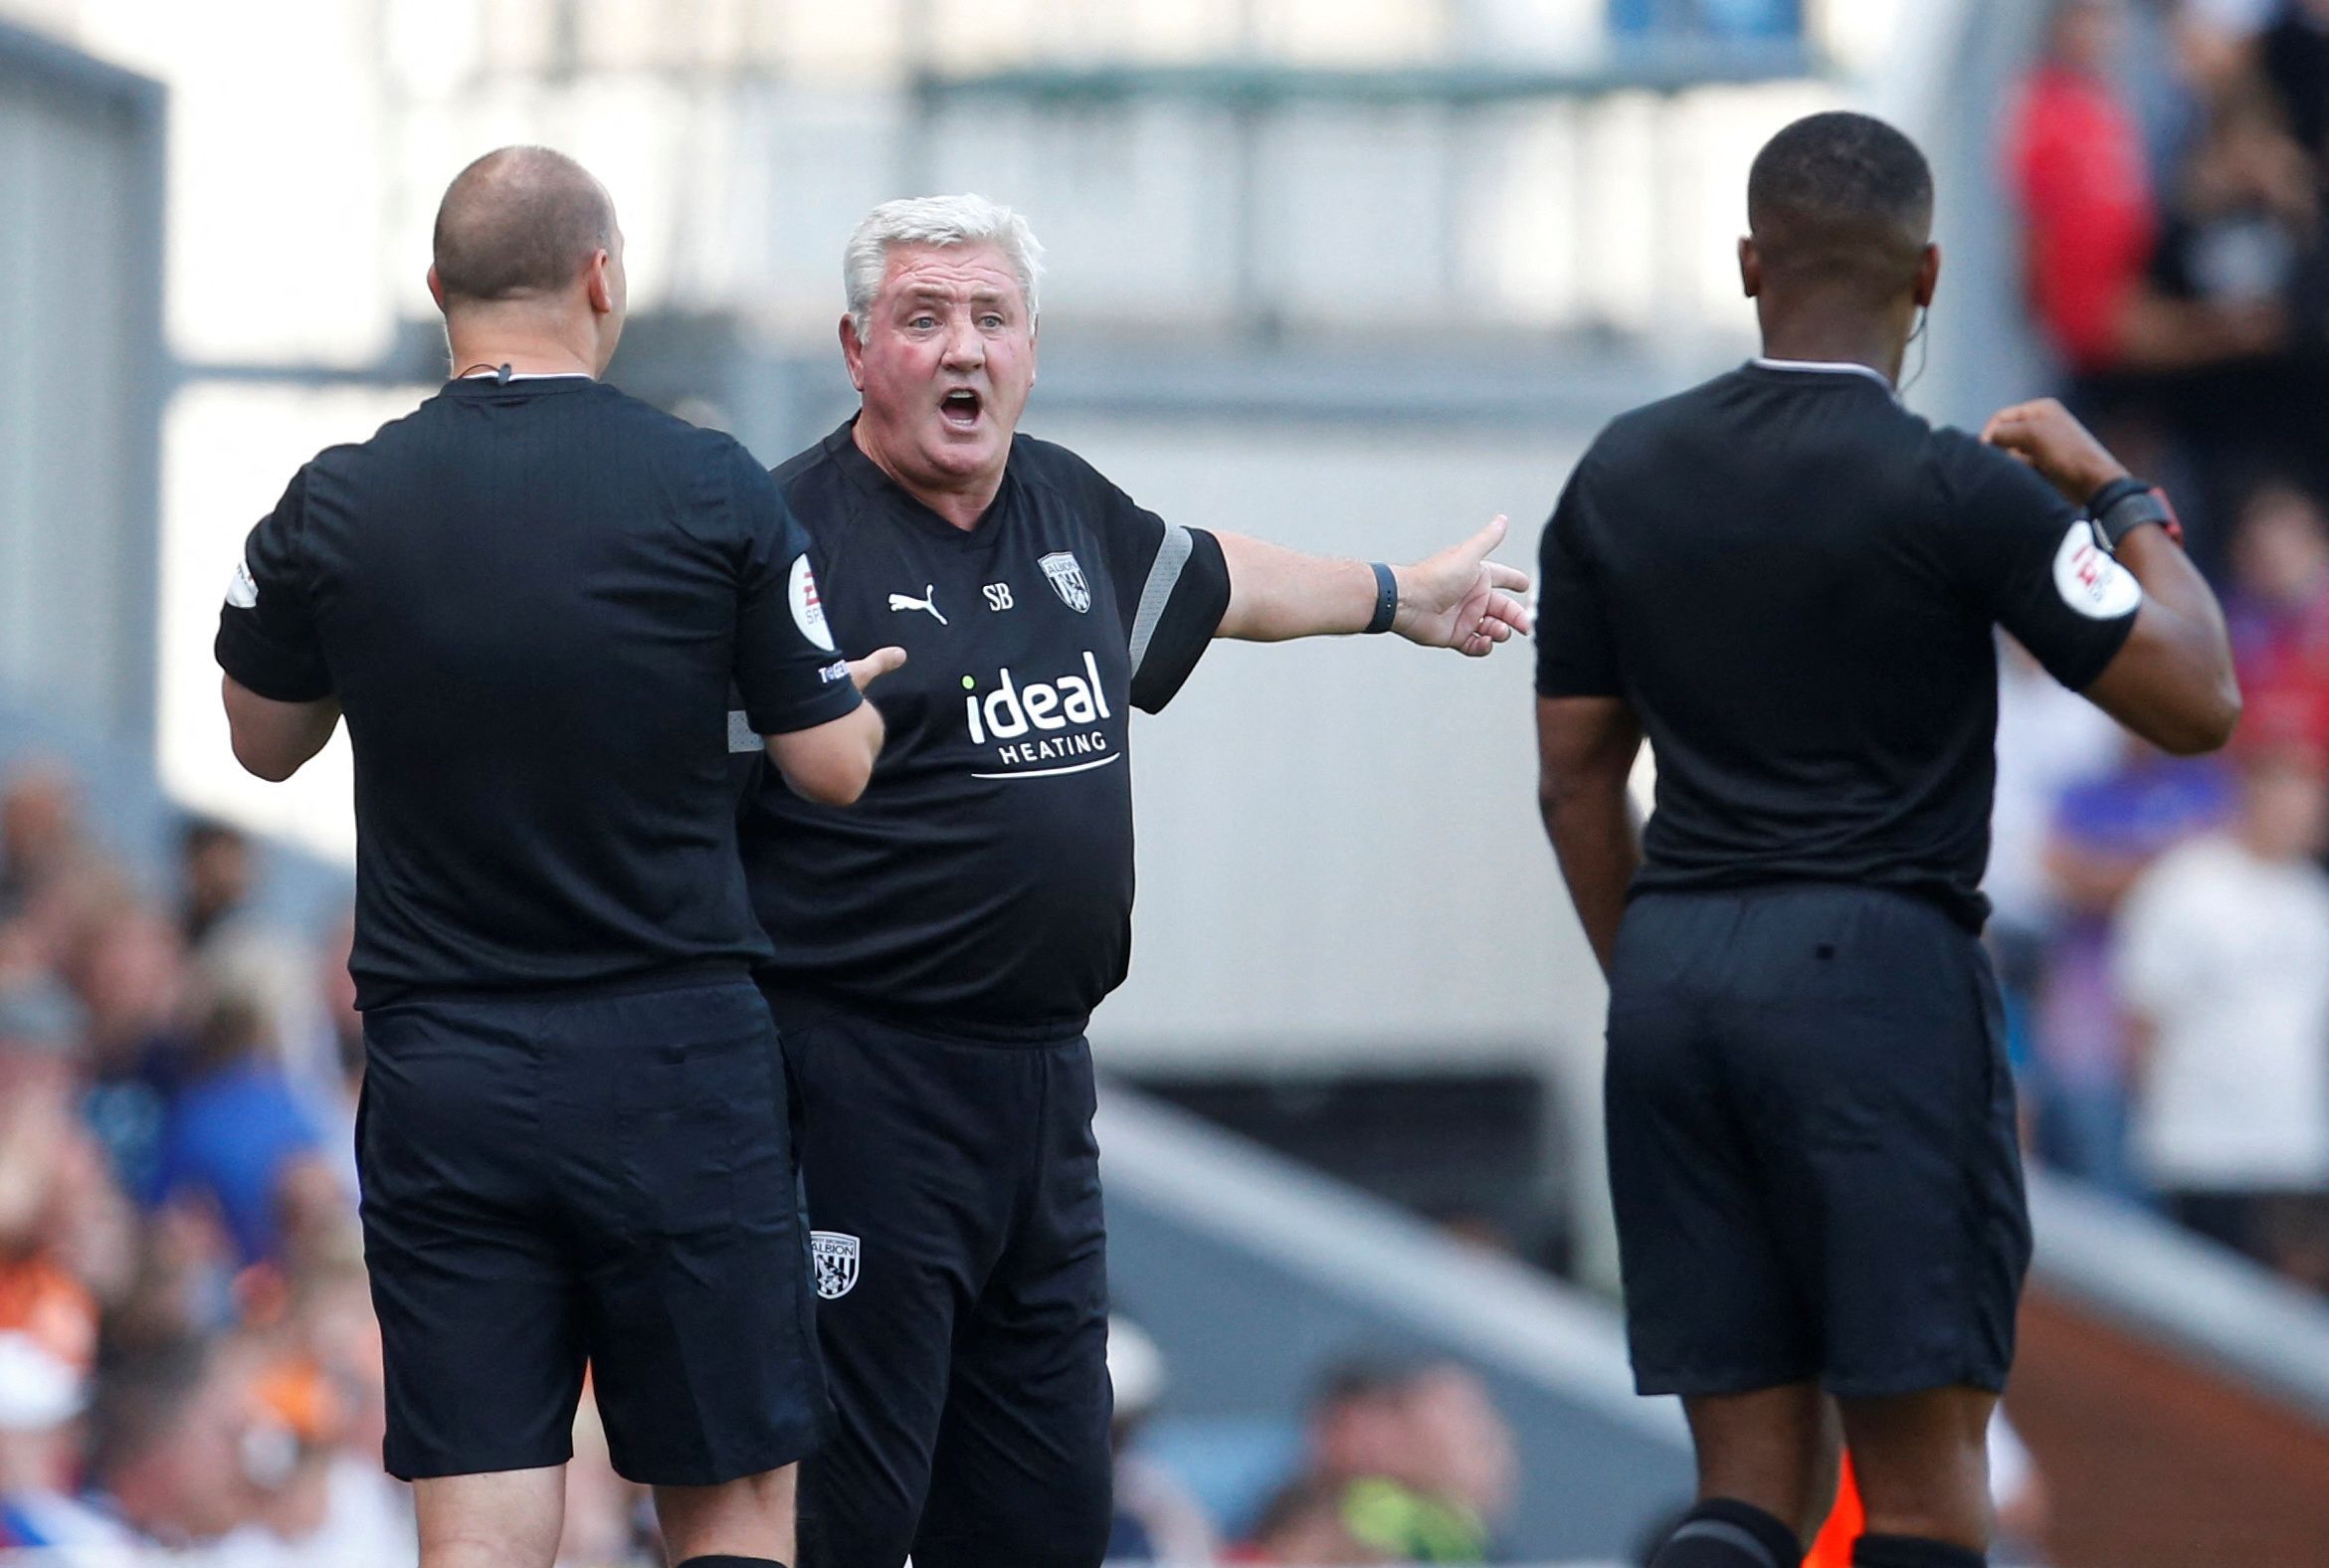 Soccer Football - Championship - Blackburn Rovers v West Bromwich Albion - Ewood Park, Blackburn, Britain - August 14, 2022 West Bromwich Albion manager Steve Bruce reacts towards the assistant referee  Action Images/Ed Sykes  EDITORIAL USE ONLY. No use with unauthorized audio, video, data, fixture lists, club/league logos or 